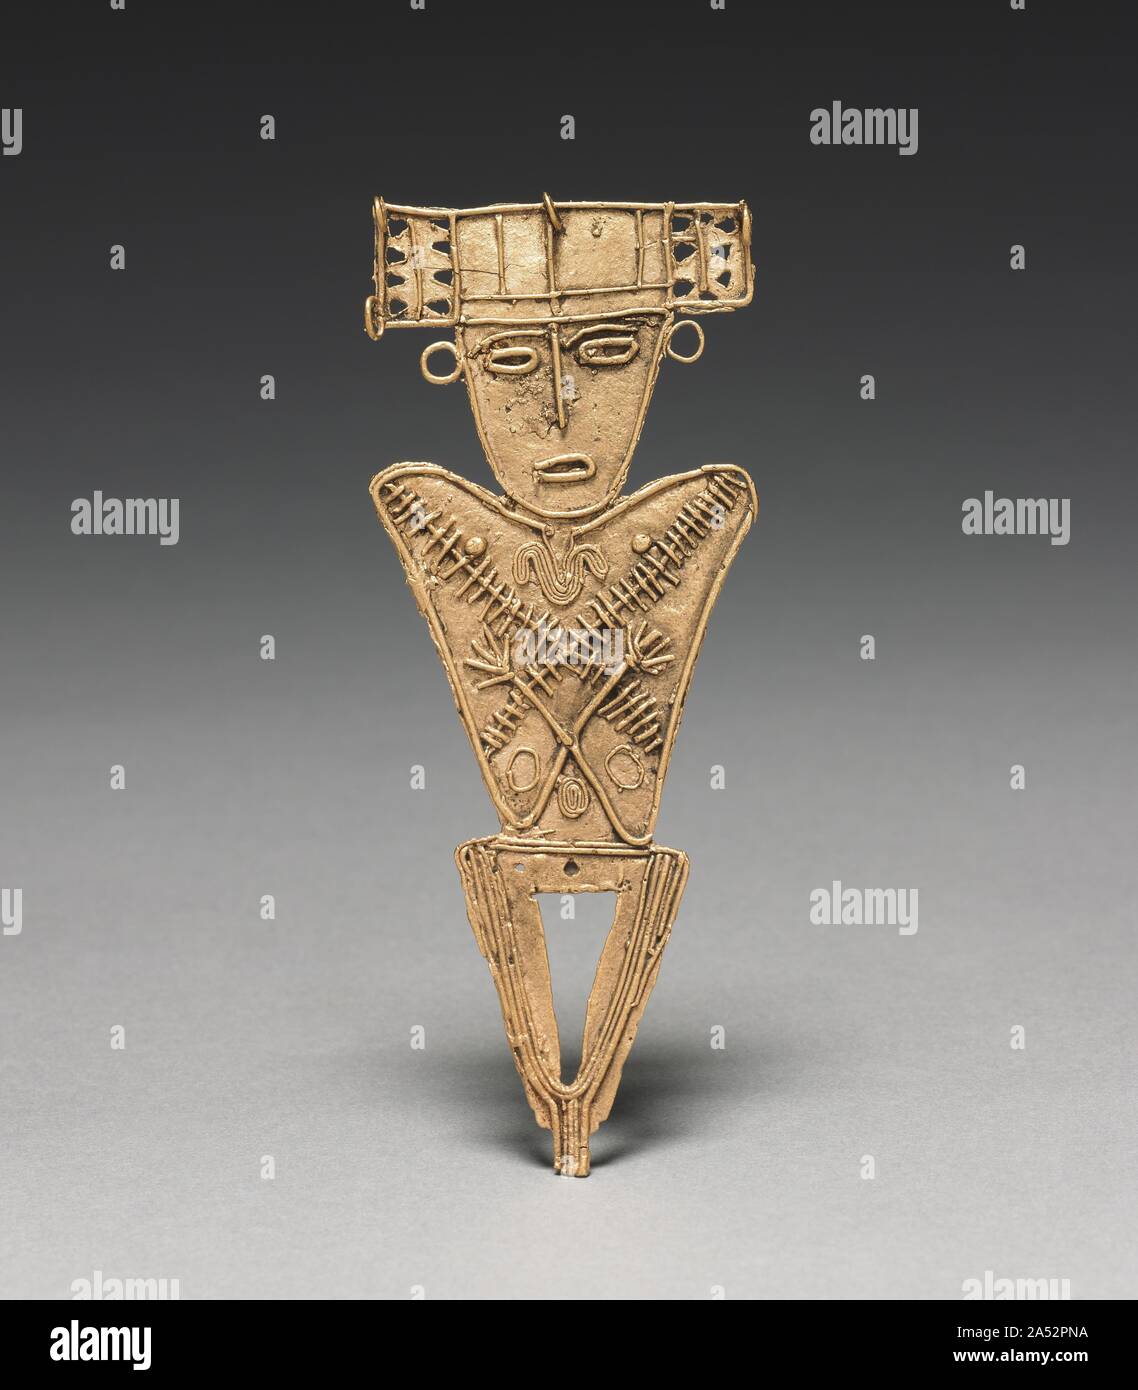 Tunjos (Votive Offering Figurine), c. 900-1550. Unlike the other gold ornaments made in the isthmian region, tunjos were not worn; instead, they served as offerings that were deposited in sacred places such as lagoons and caves. They often depict humans who hold something. Perhaps because they were not meant for display, tunjos were not finished after lost-wax casting. Flaws remain uncorrected, surfaces are unpolished, and gold that backed into the channel used to pour the molten metal into the mold was left in place. Stock Photo